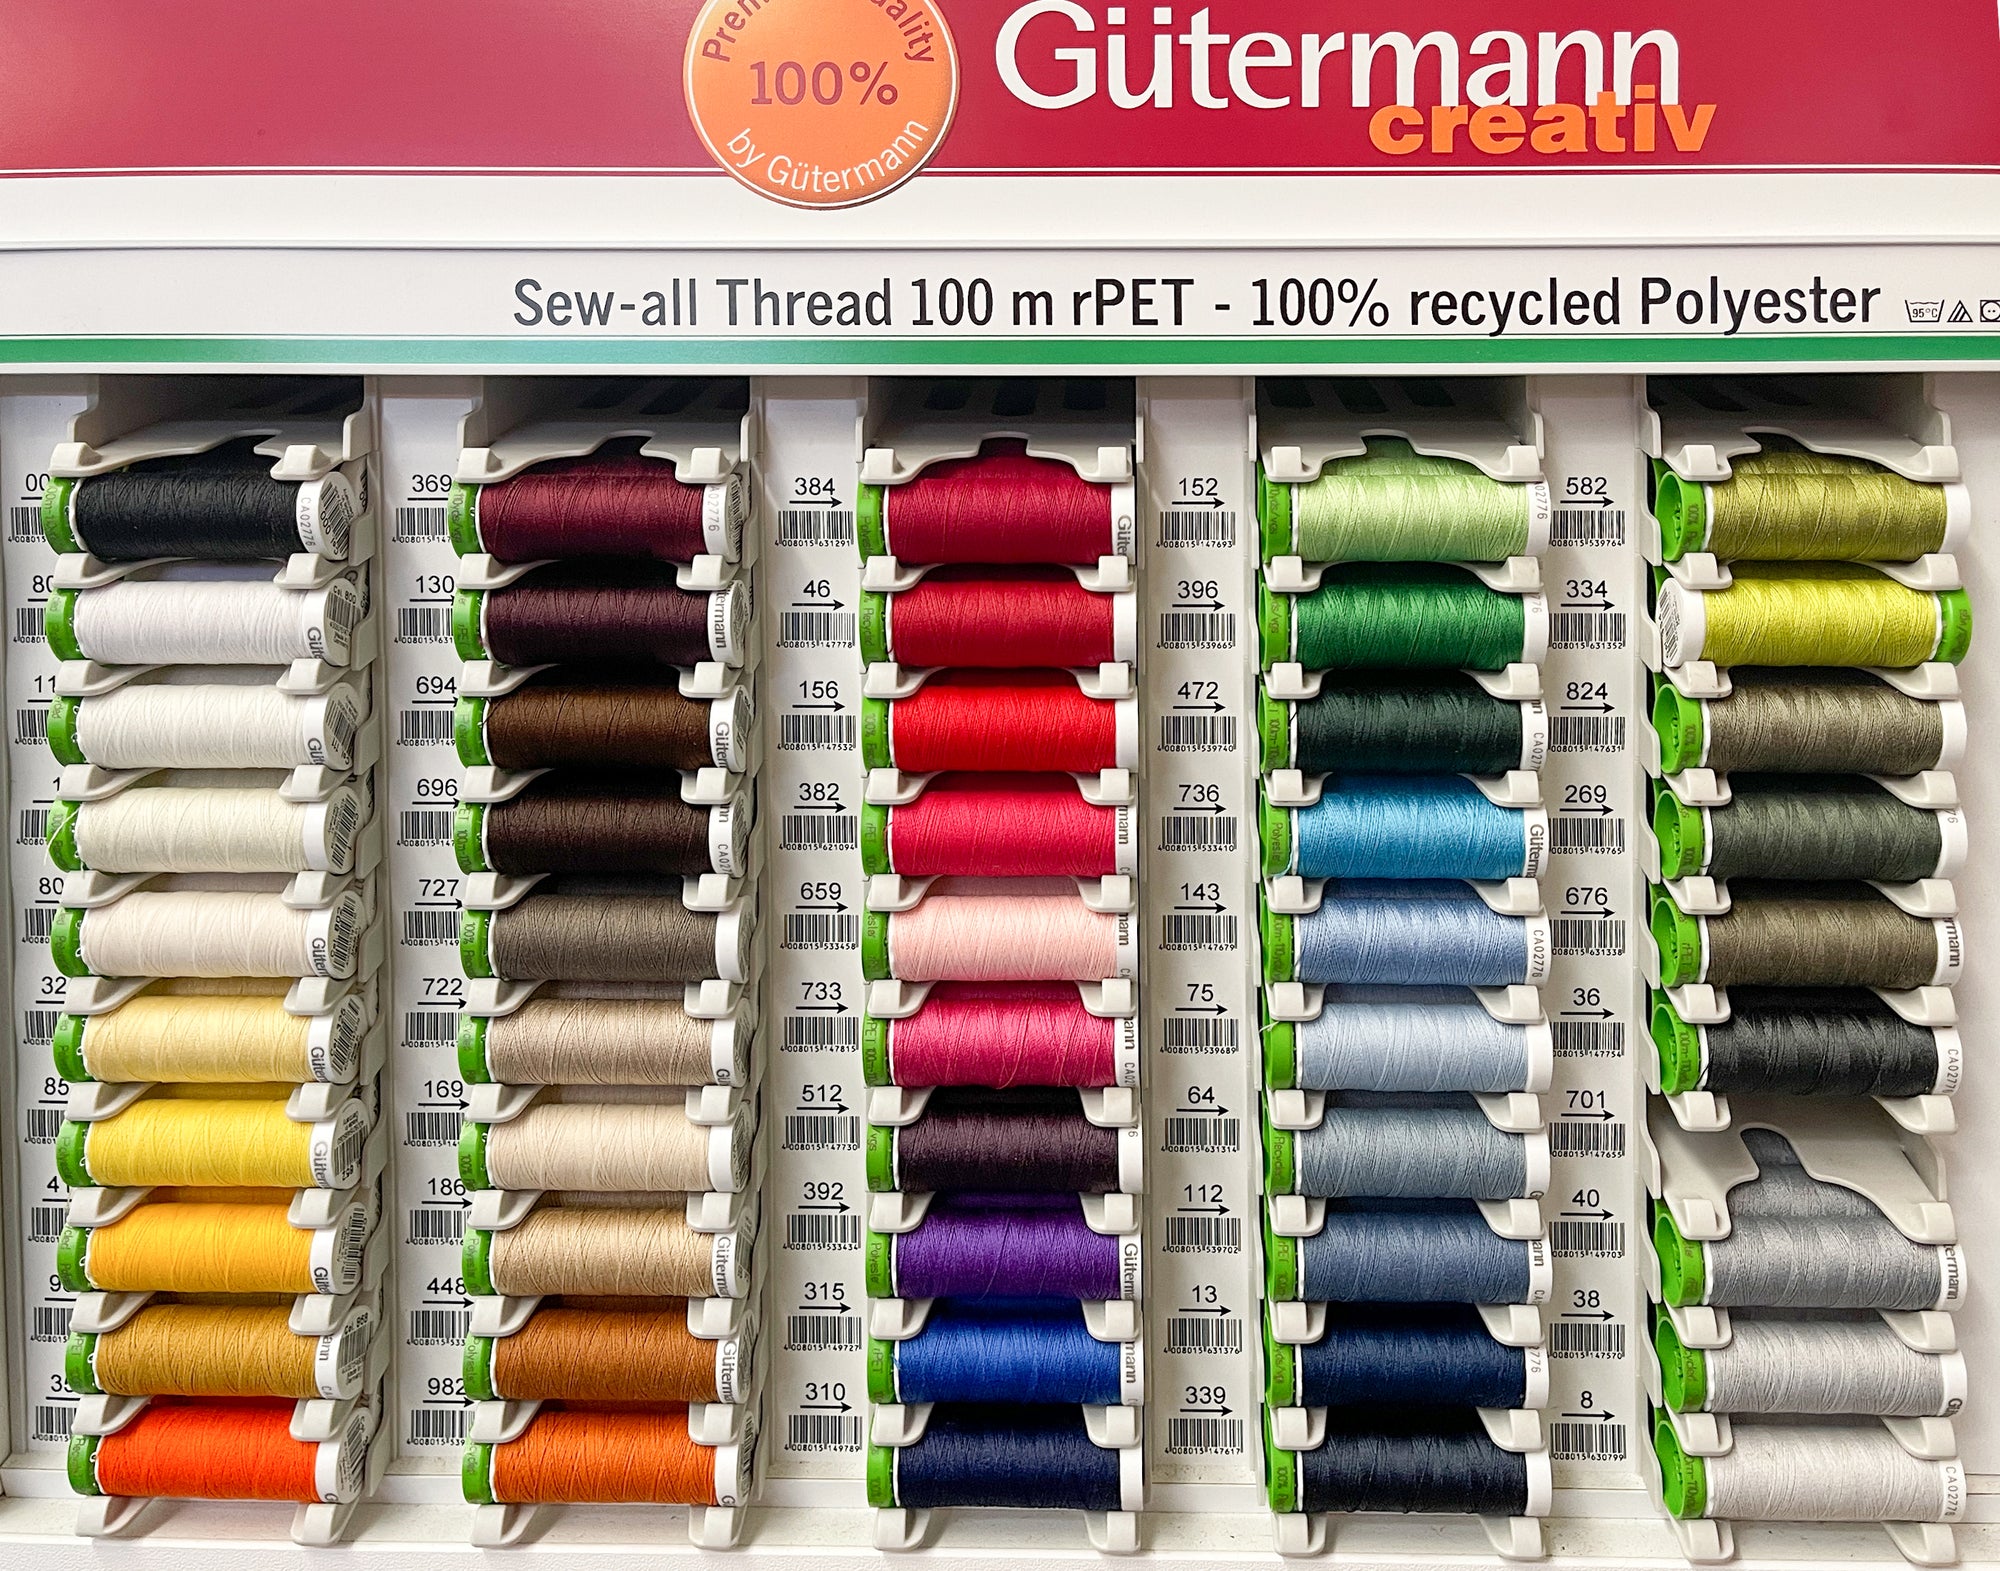 Gutermann Recycled Polyester rPET Thread 110 Yards